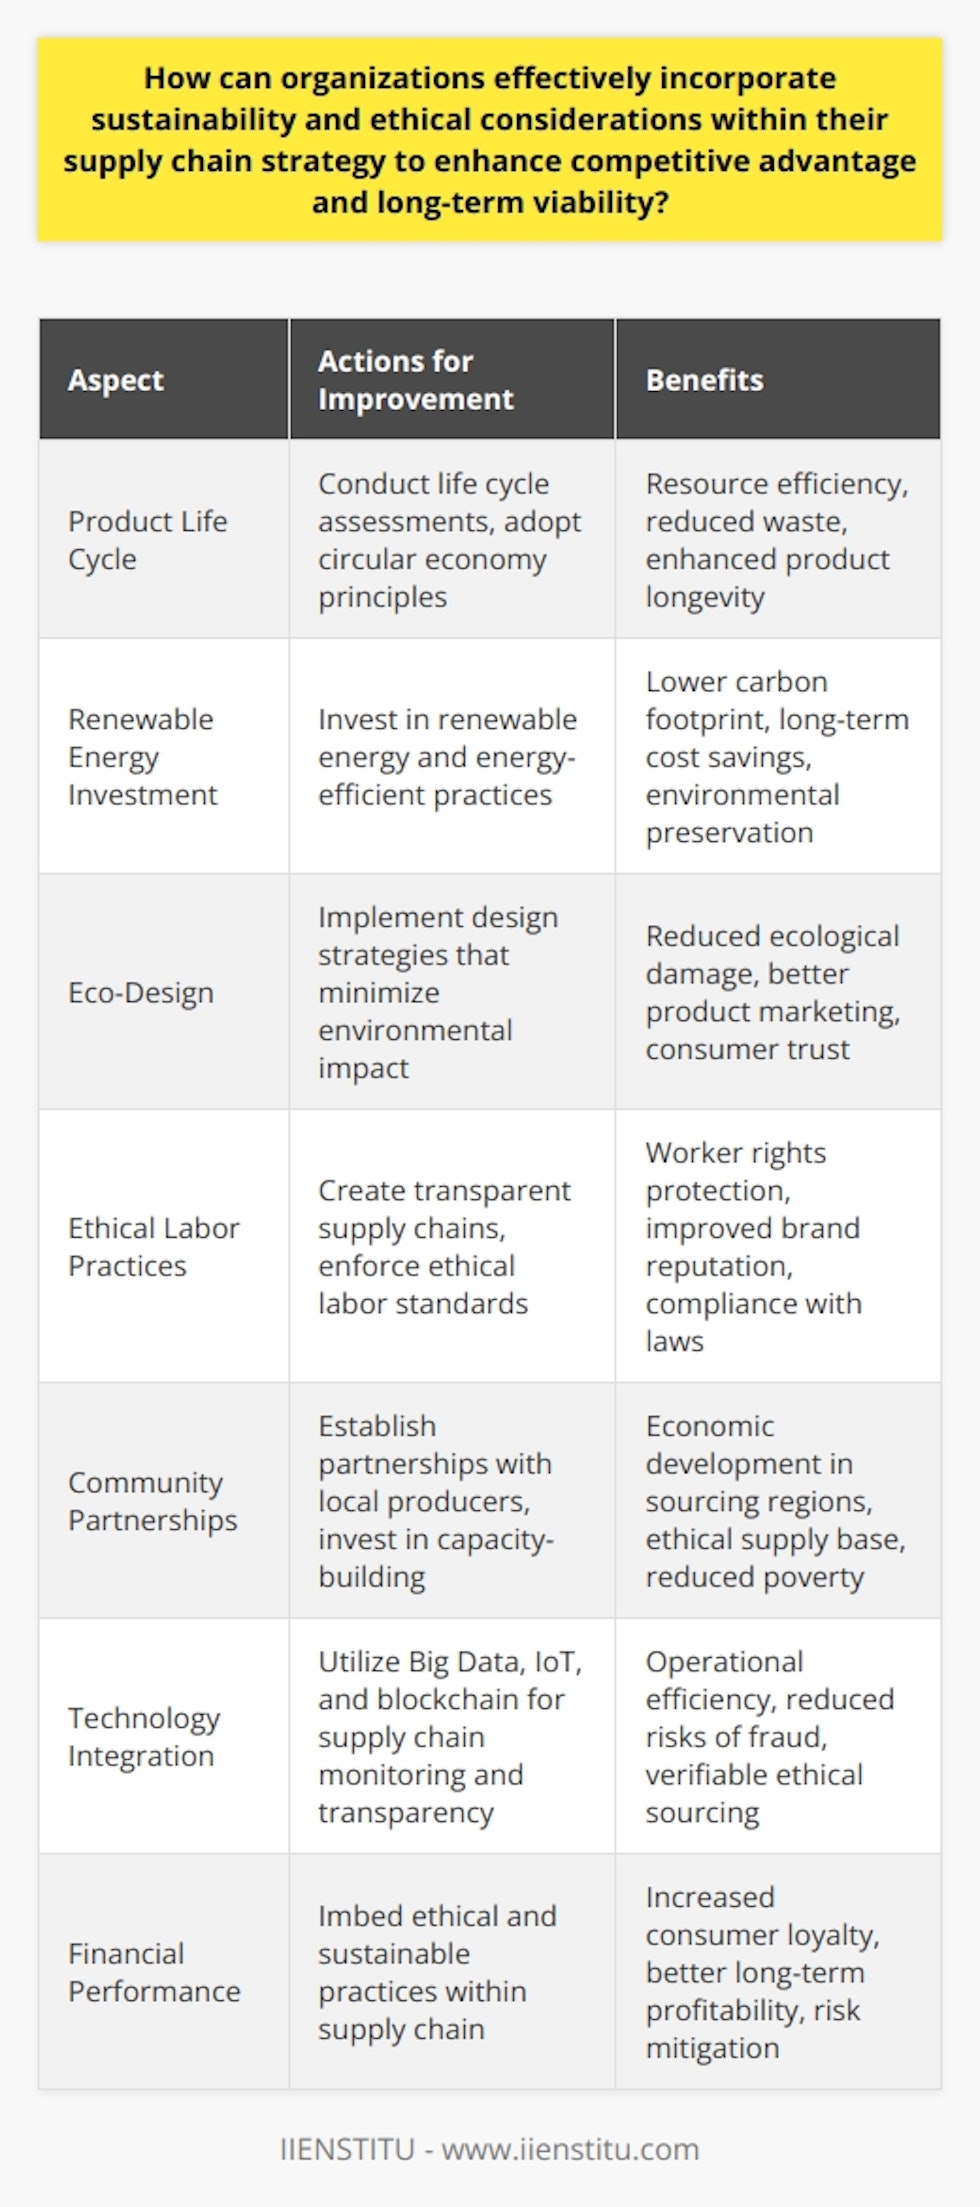 The quest for sustainability and ethical practices within the supply chain has emerged as a pressing priority for businesses across sectors. Given the heightened consumer awareness and the tightening of regulatory environments, organizations that proactively address these issues stand to gain a significant competitive edge.In order to adequately incorporate sustainability into their supply chain strategy, companies need to begin by evaluating their current operations in-depth. Life cycle assessments of products, from raw materials to disposal, can provide valuable insights into where improvements can be made. Resource efficiency can be significantly enhanced by adopting circular economy principles, which prioritize reuse and recycling over the disposal of materials.Moreover, investment in renewable energy and energy-efficient processes is crucial, not only for reducing carbon footprints but also for long-term cost savings. Businesses should also consider designing products with sustainability in mind, known as 'eco-design', to reduce environmental impact during the product's life cycle. Ethical considerations are another cornerstone of a robust supply chain strategy. Beyond compliance with basic standards, companies should strive to lead by example. This includes creating transparent supply chains that offer visibility into the working conditions of laborers at all stages, sourcing materials from suppliers that implement ethical practices, and ensuring that the rights of workers are respected throughout the supply chain. Organizations can invest in training and capacity-building initiatives for their suppliers to ensure compliance with ethical standards. Moreover, by establishing direct partnerships with local communities and smallholder producers, companies can help foster economic development and reduce poverty in the regions they source from, underpinning broader ethical commitments.Technology stands as a powerful enabler for achieving sustainable and ethical supply chains. For instance, Big Data analytics can aid in streamlining operations to reduce wastage, while Internet of Things (IoT) devices can help in monitoring environmental conditions along the supply chain. Blockchain technology, in particular, offers a transparent and immutable ledger, which can track the ethical sourcing of materials and reduce the risk of fraud or corruption.A forward-looking approach that integrates ethical and sustainable supply chain strategies is a sign of a resilient organization. By adapting to sustainable ways of working, companies not only align with regulatory frameworks but also foresee and mitigate potential risks associated with scarcity of resources, climate change, and workforce instability.Companies that succeed in embedding ethical and sustainable practices into their supply chain stand to benefit from increased consumer trust and loyalty. The Institute of Business Ethics found that ethically sound companies display better financial performance in the long run, underlining that ethical conduct and profitability can go hand in hand.An example of an online education provider that focuses on responsible and sustainable business education is IIENSTITU. Through their commitment to sustainability and ethics, they provide educational resources, helping professionals understand the importance and implementation of sustainability in business operations, including supply chain strategies.In the end, an ethically grounded and sustainable supply chain model is not just about compliance or reputation—it is a strategic imperative in today's global marketplace. Not only does it bolster a company’s long-term viability, but it also contributes to a stronger, more positive global impact. The organizations that recognize this link will not only secure a competitive advantage but also contribute to a more prosperous and responsible business ecosystem.